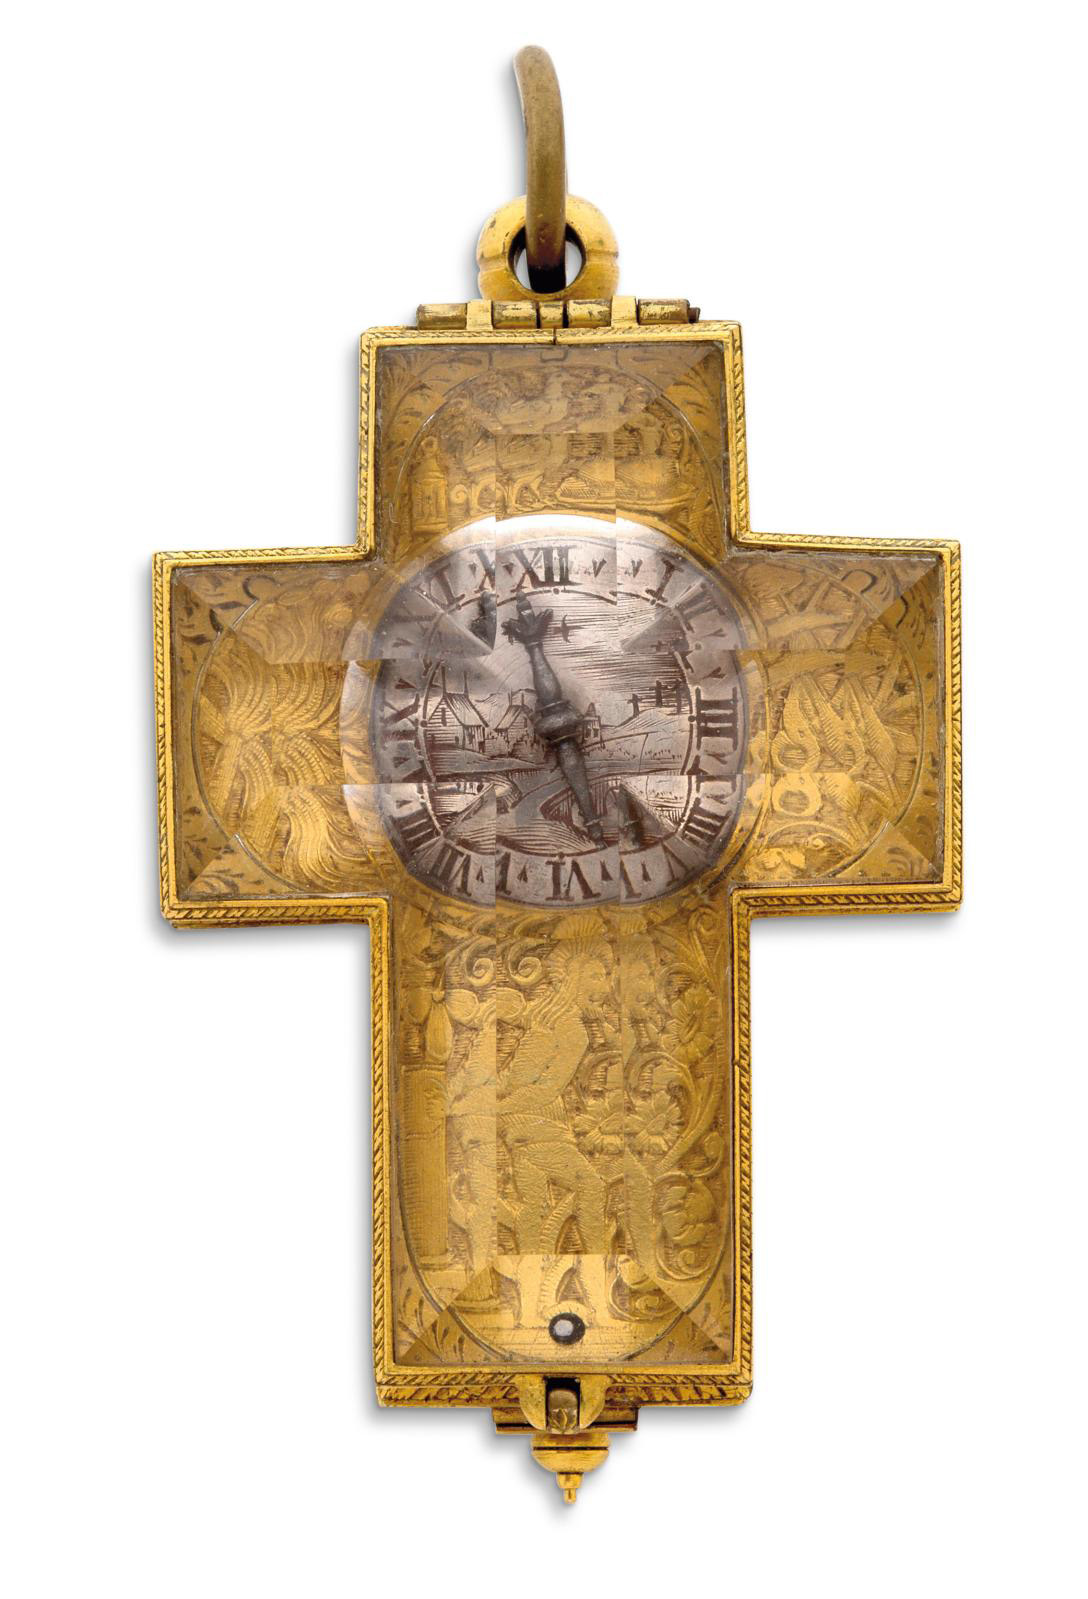 Fonnereau, La Rochelle, mid-17th century, cross-shaped watch, gilded metal and rock crystal, pre-balance spring, silver dial engraved with